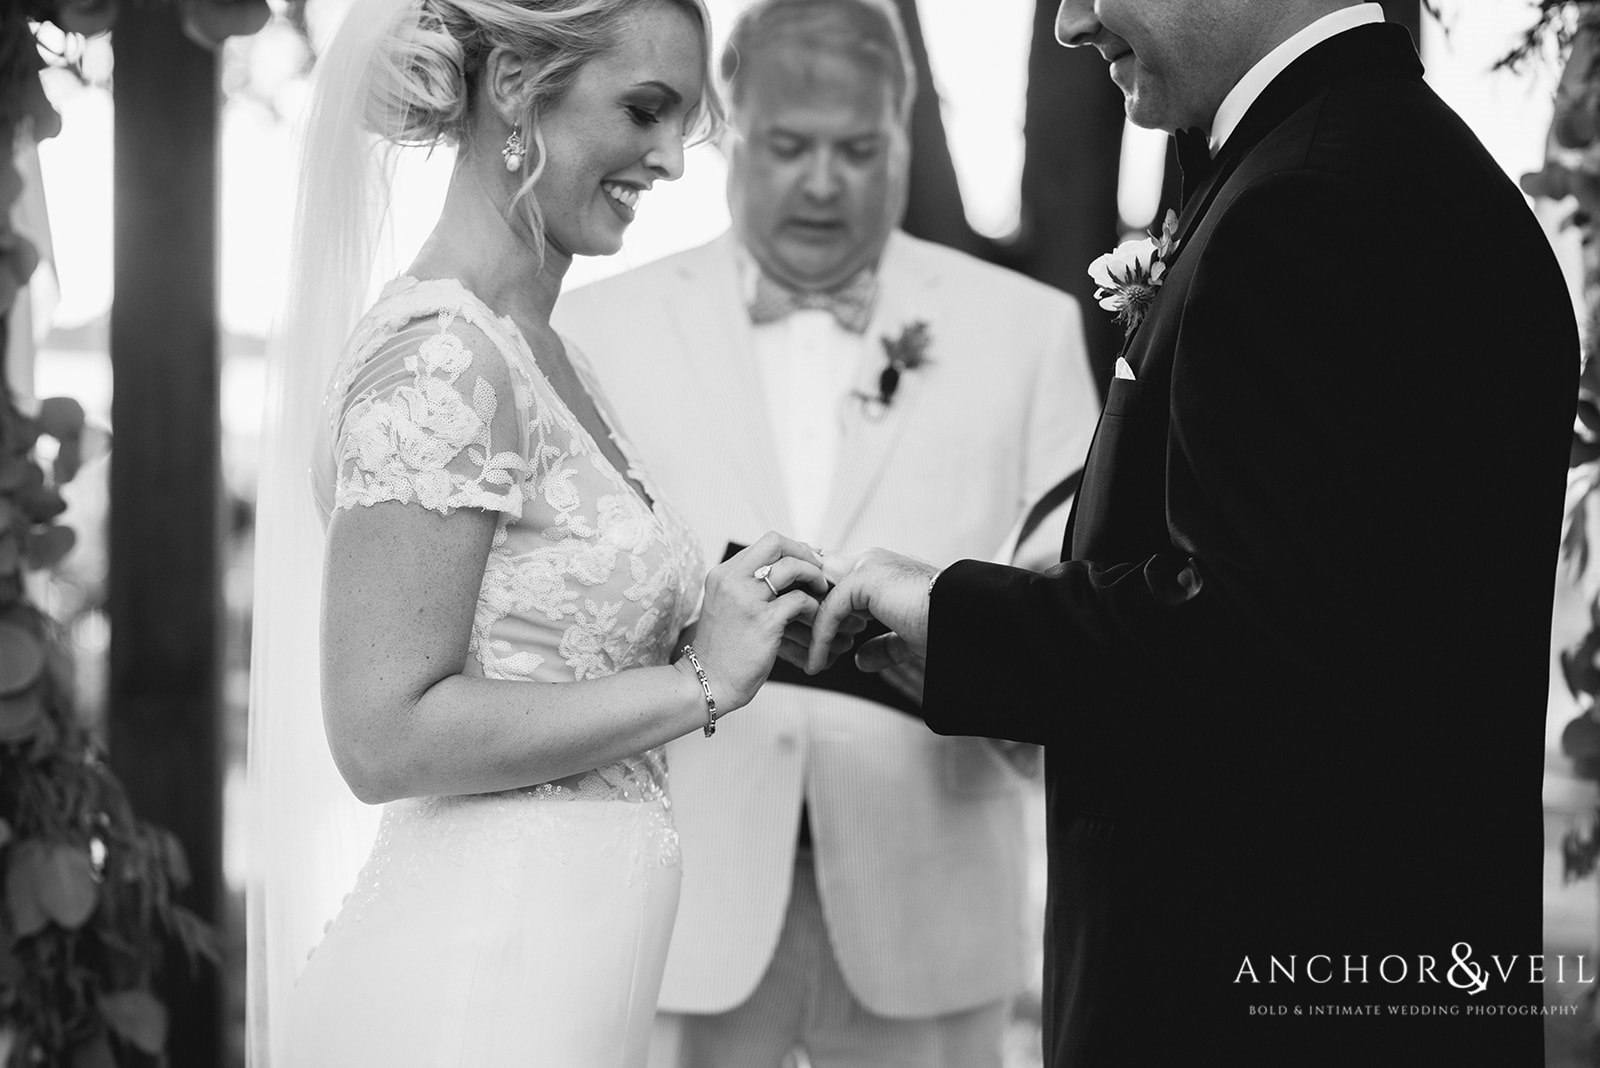 The bride placing the ring on the groom's hand during the ceremony at the Lowndes Grove Plantation Wedding